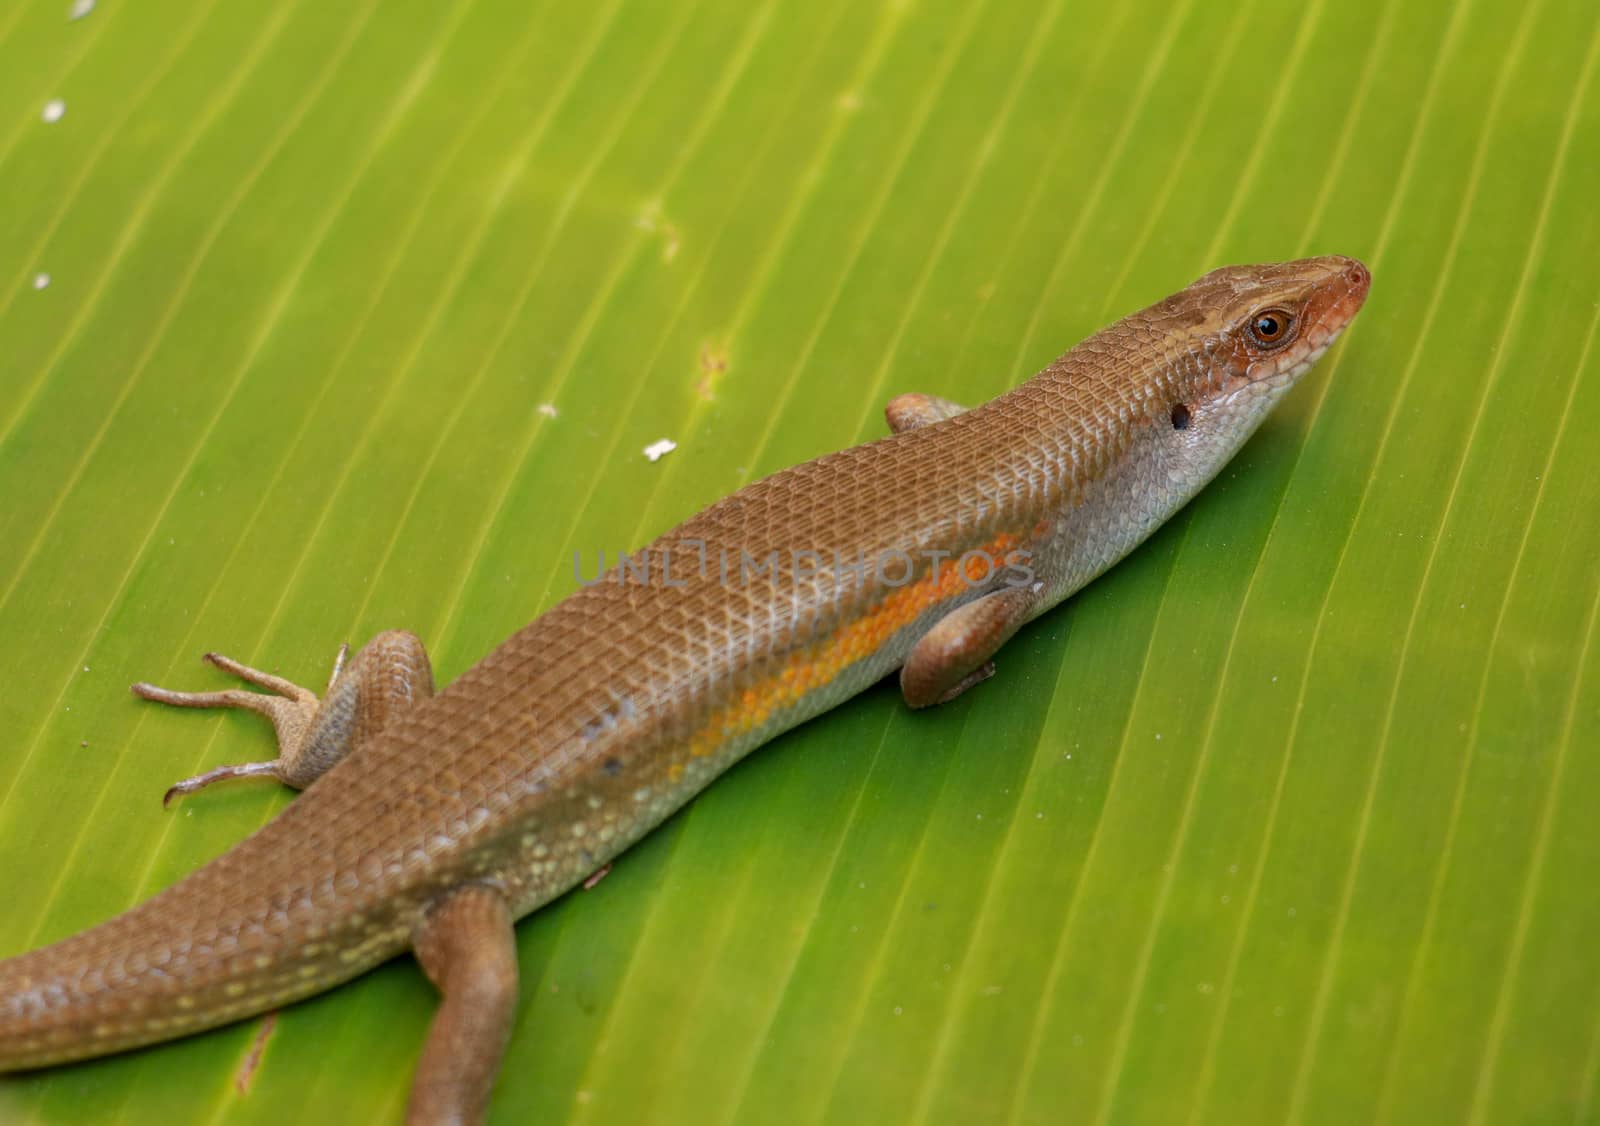 East Indian Brown Skin, Many-lined Sun Skink, or Common Sun Skink, while the scientific name, Eutropis multifasciata, East Indian Brown Skink in the wild. Lizards on green leave. Nature background by Sanatana2008